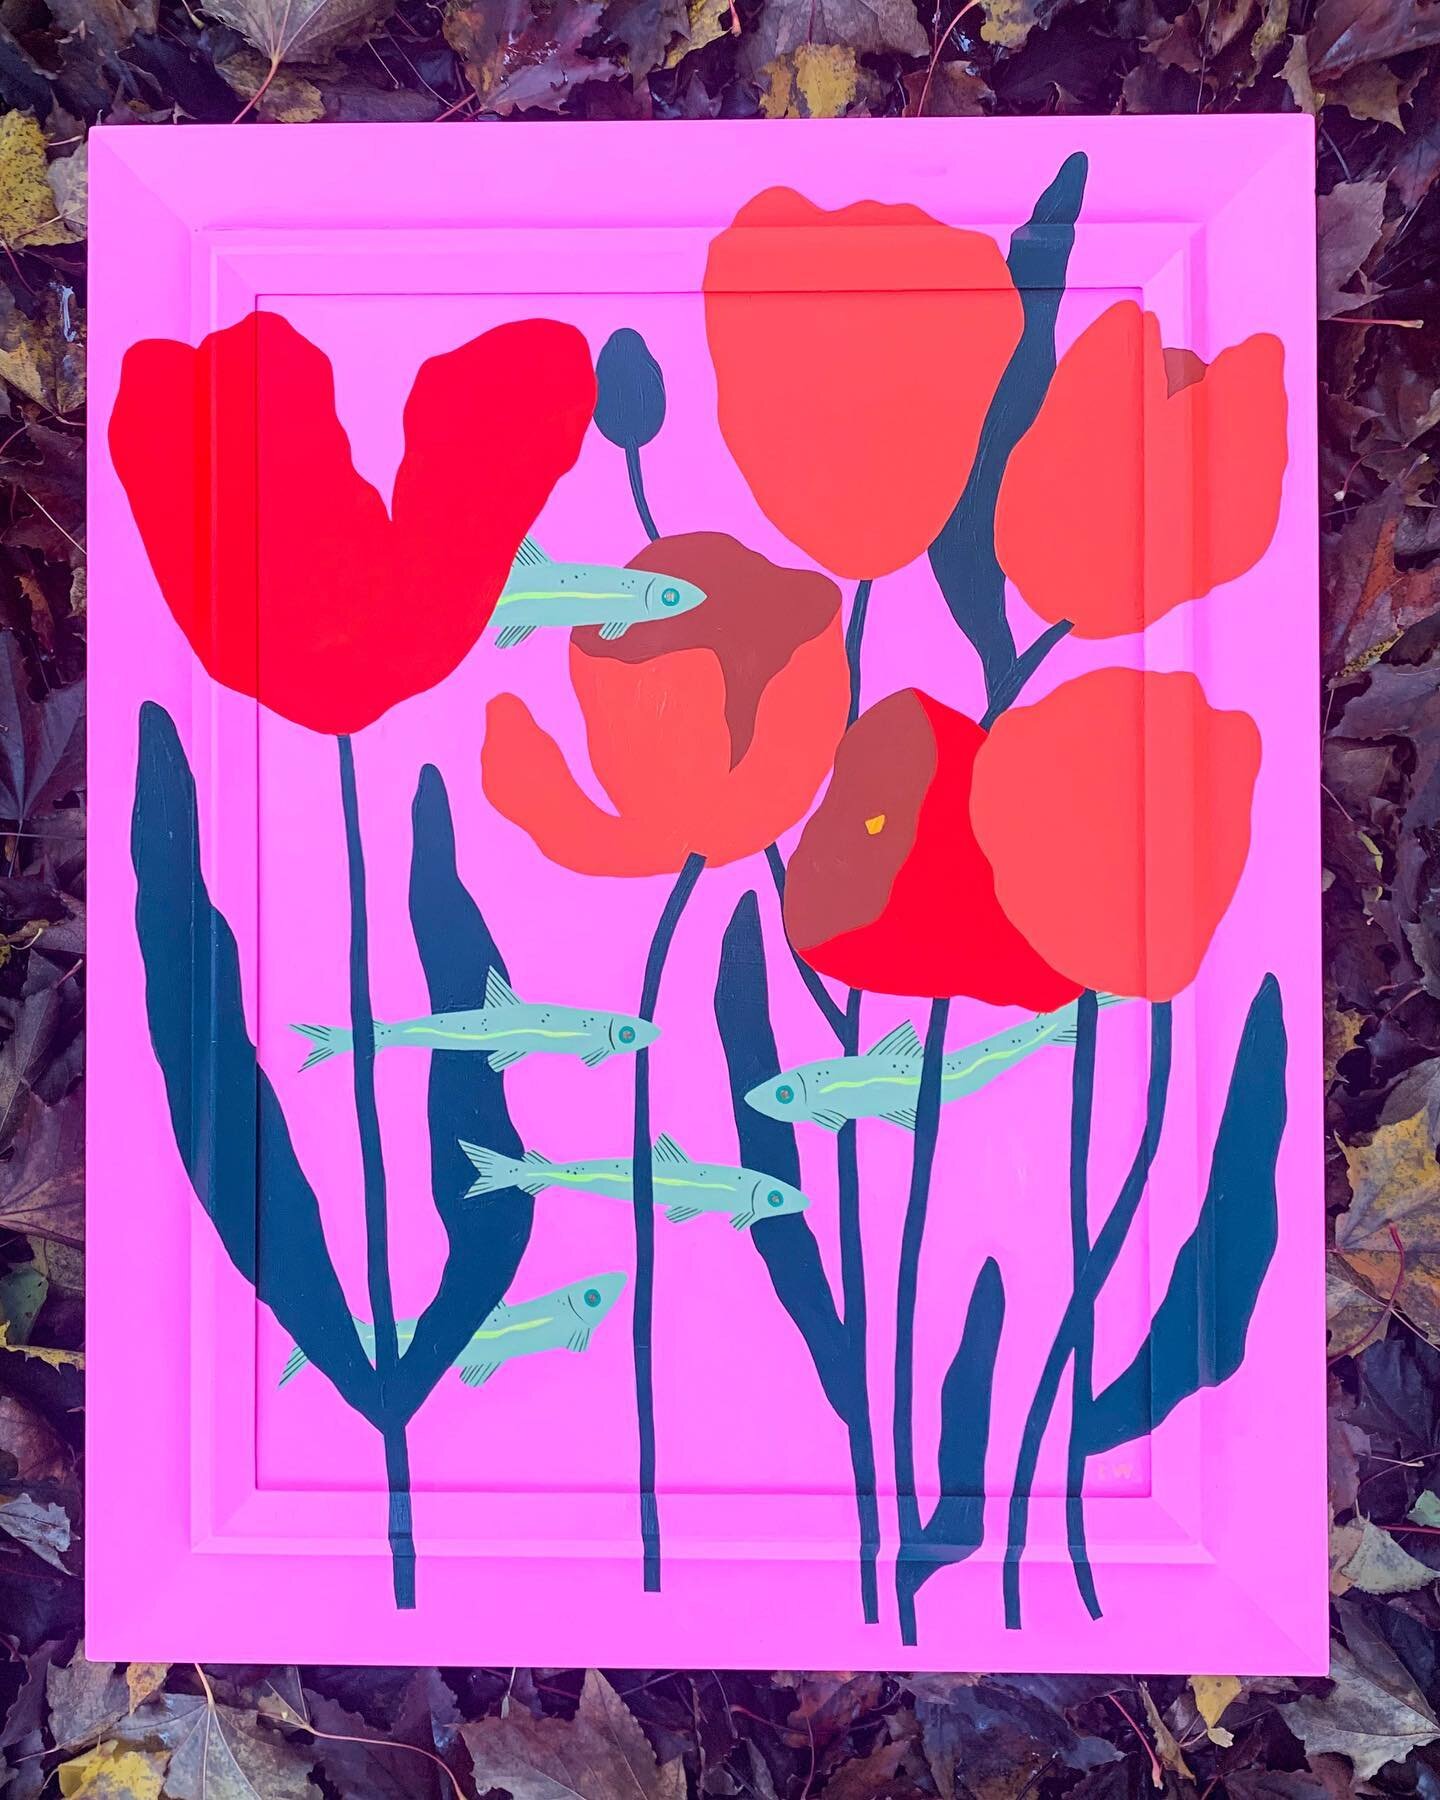 Ok no more pretending real chilly willickers midwest fall is here.  To honor its arrival, I went outside in slides and flannel to photograph this hot pink tulips + rainbow smelt painting in a spooky pile of leaves. (This one&rsquo;s for a show at @na